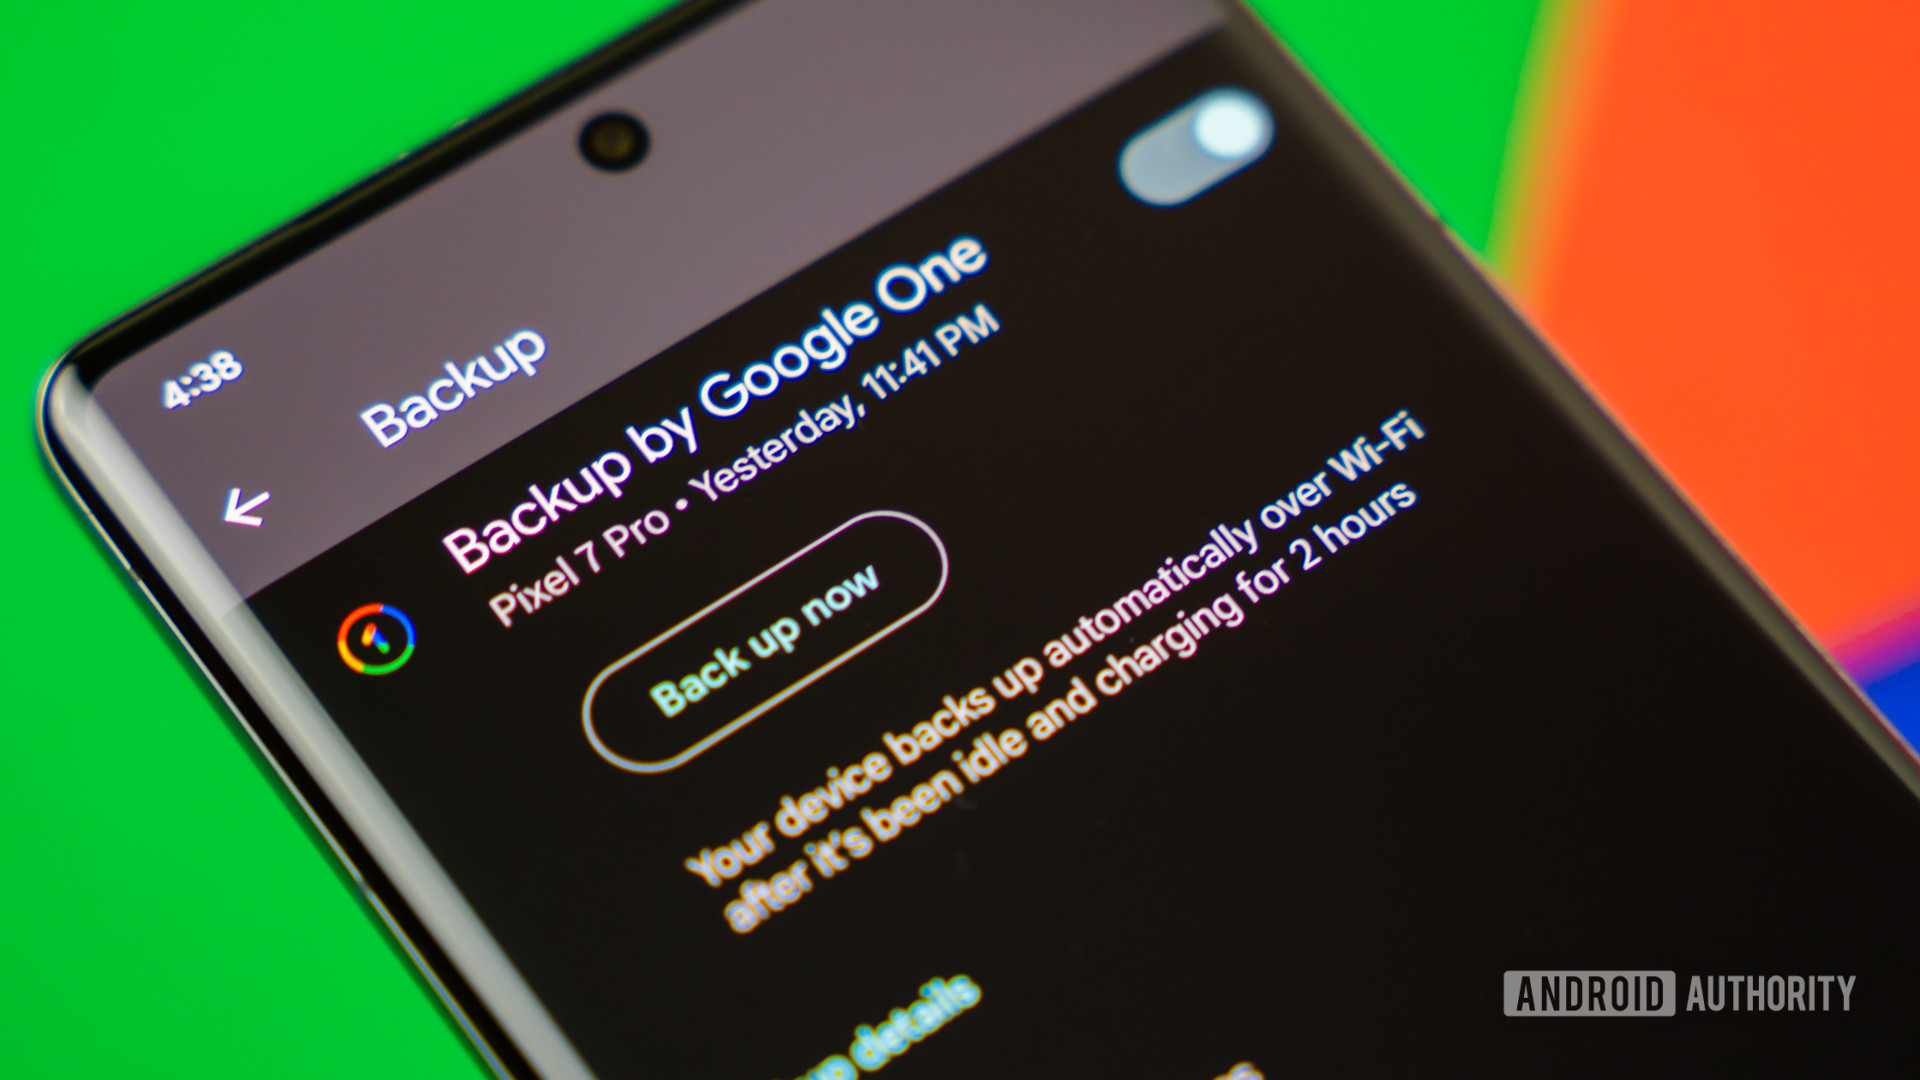 Backup by Google one settings page on smartphone Stock photo 3